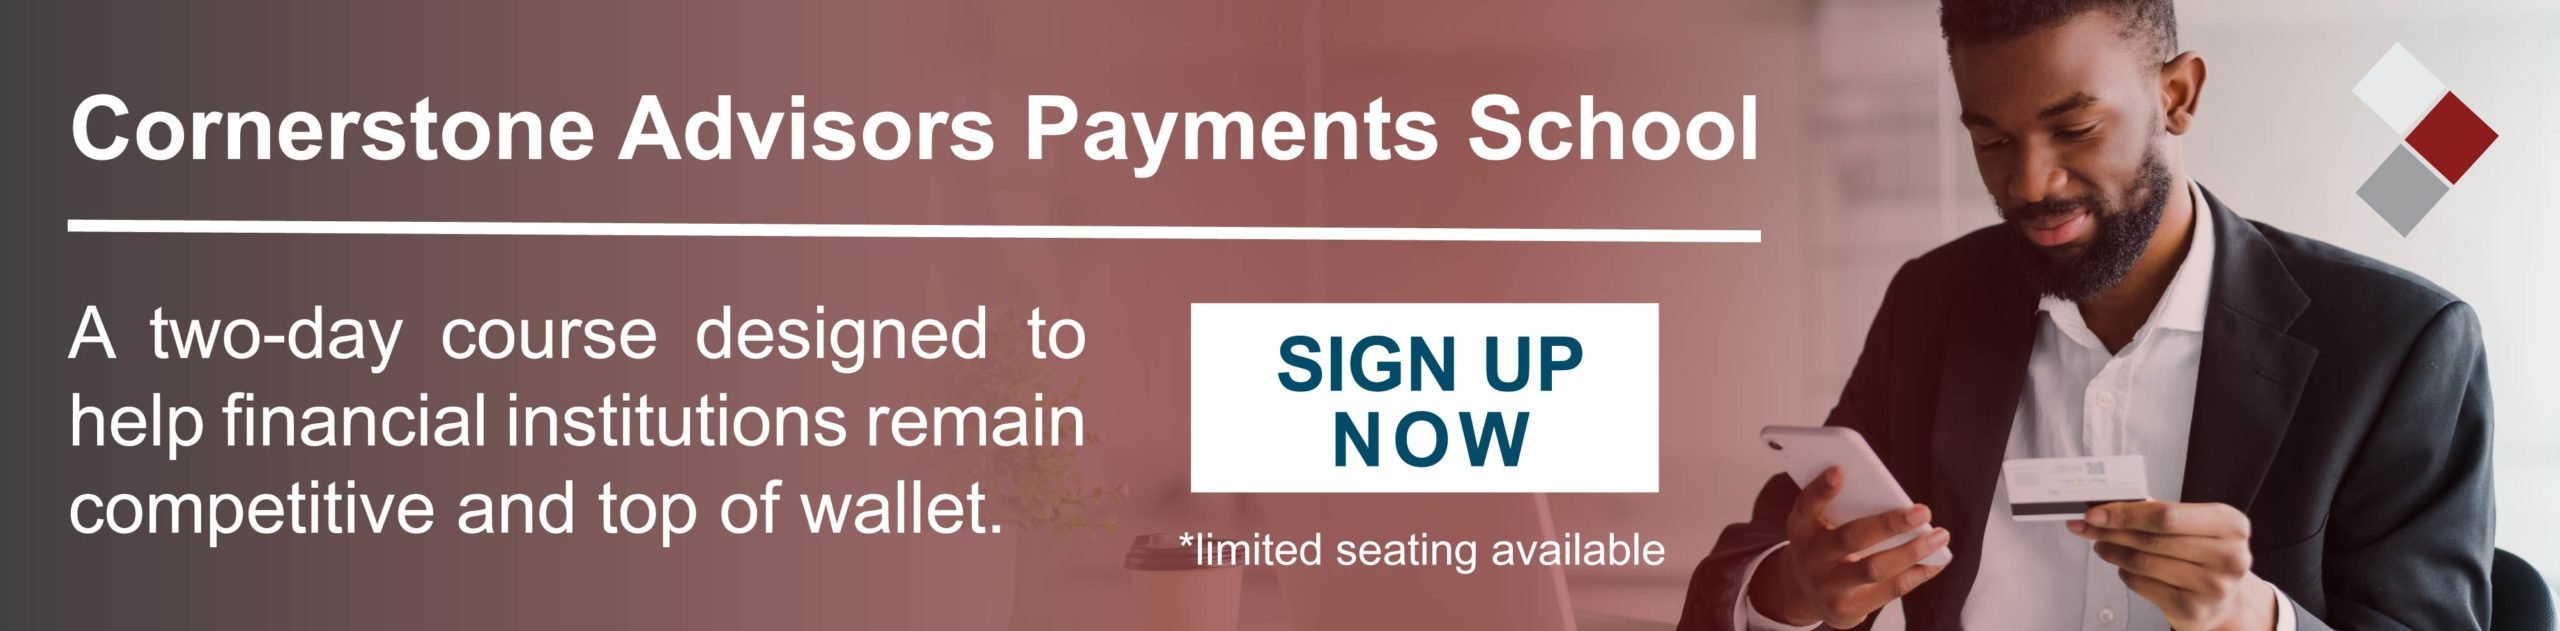 Payments-School_Banner_DK4-scaled